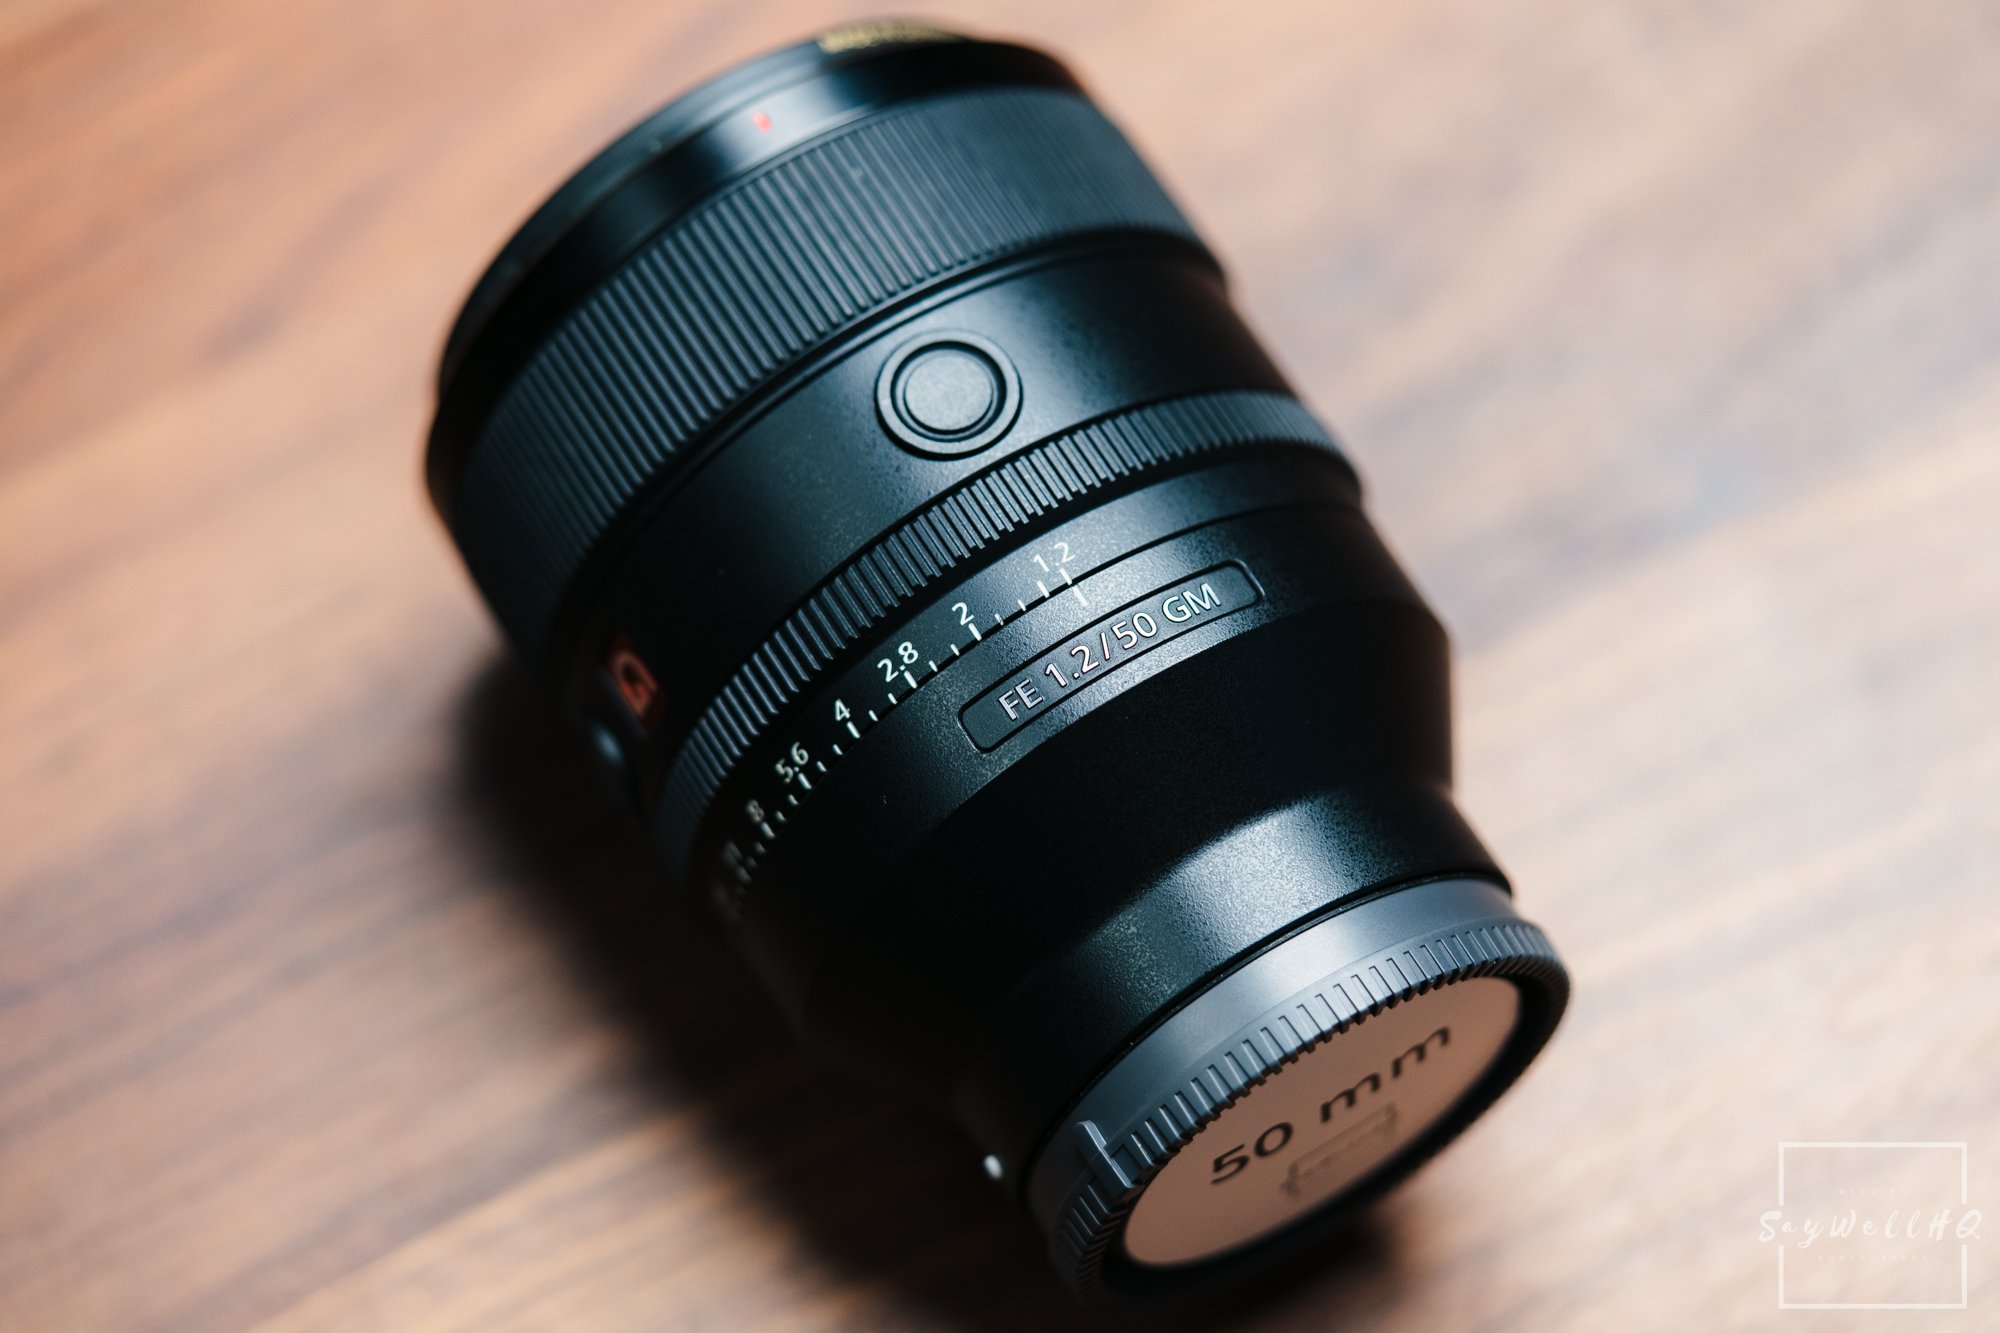  At 778 Grams, It’s a Heavy Lens, But There Has To Be A Trade-Off For The F1.2 Aperture 